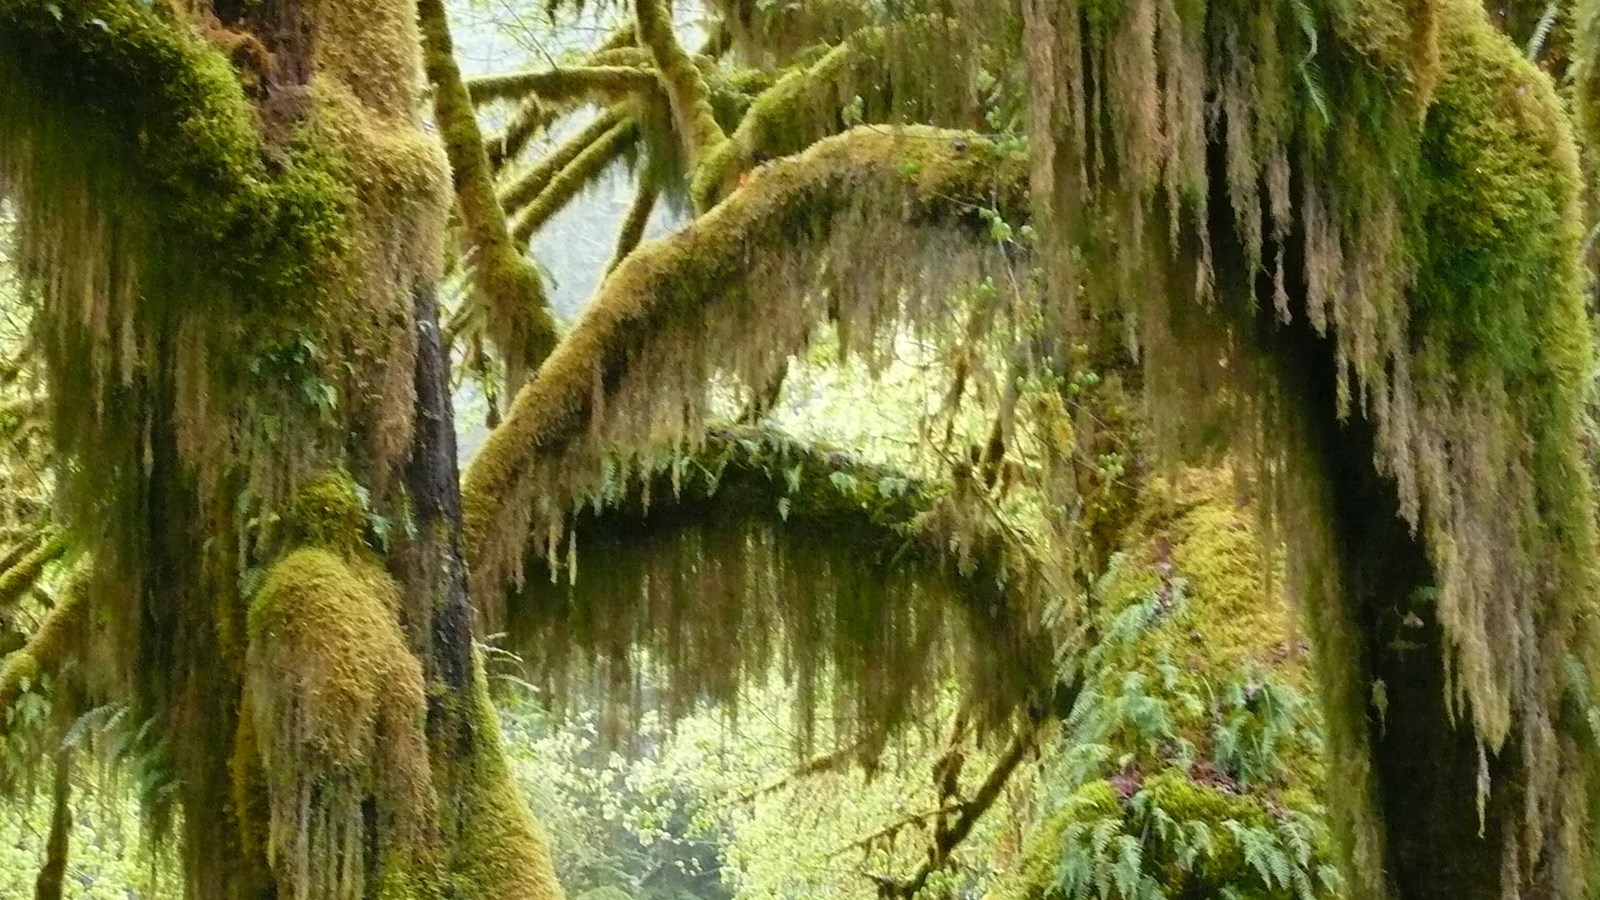 Tree trunks covered in moss and ferns